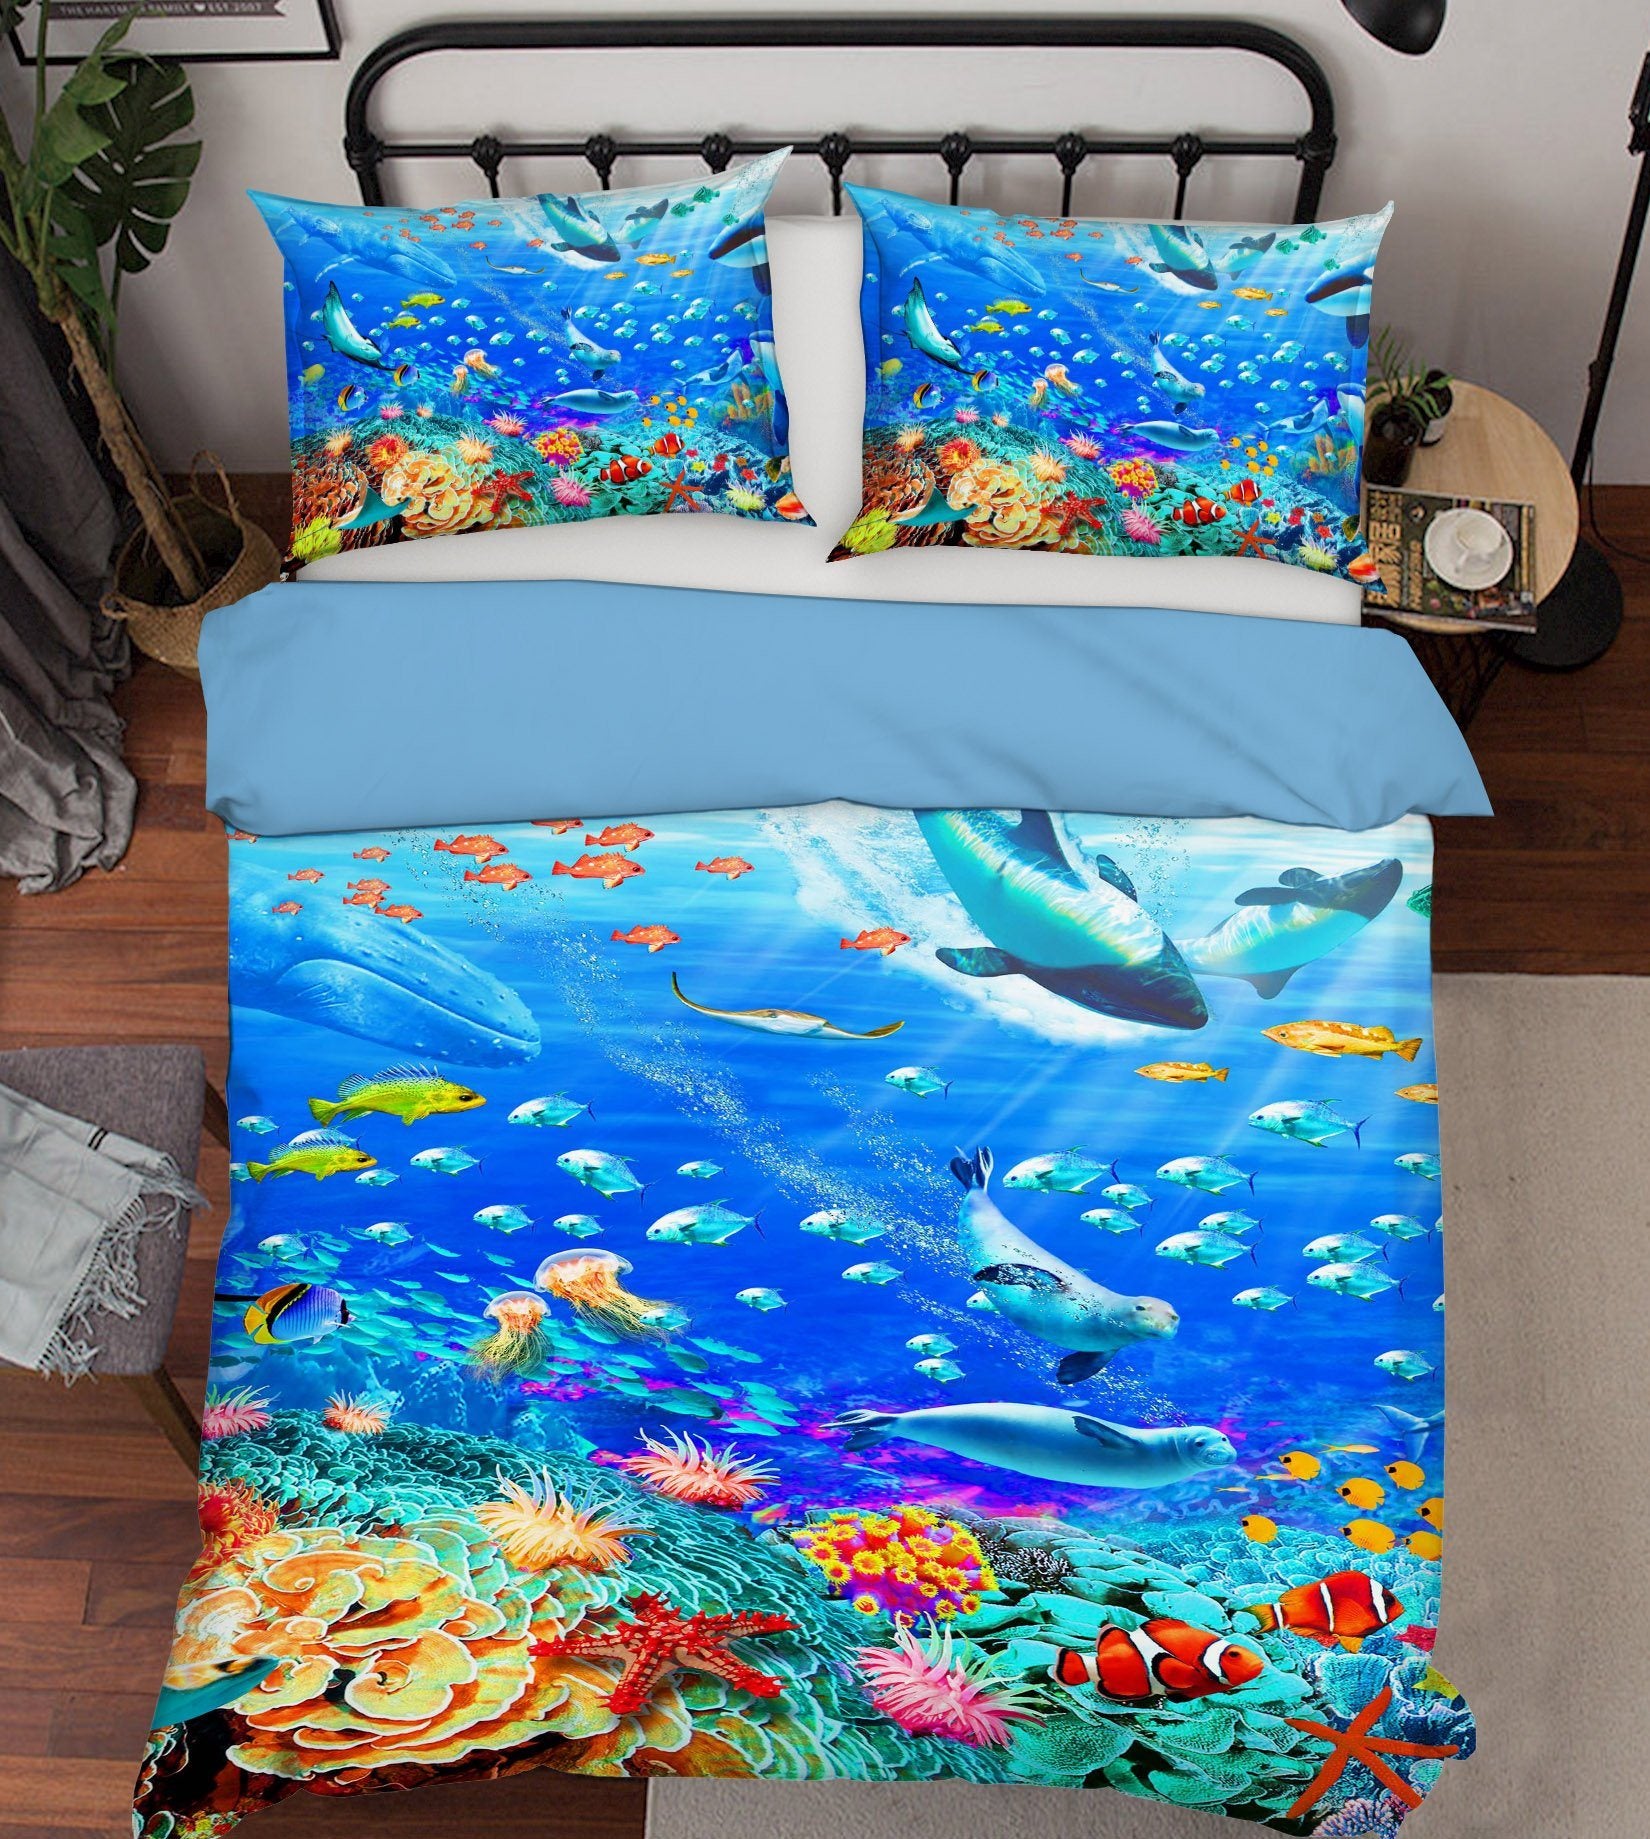 3D Beautiful Seabed 2113 Adrian Chesterman Bedding Bed Pillowcases Quilt Quiet Covers AJ Creativity Home 